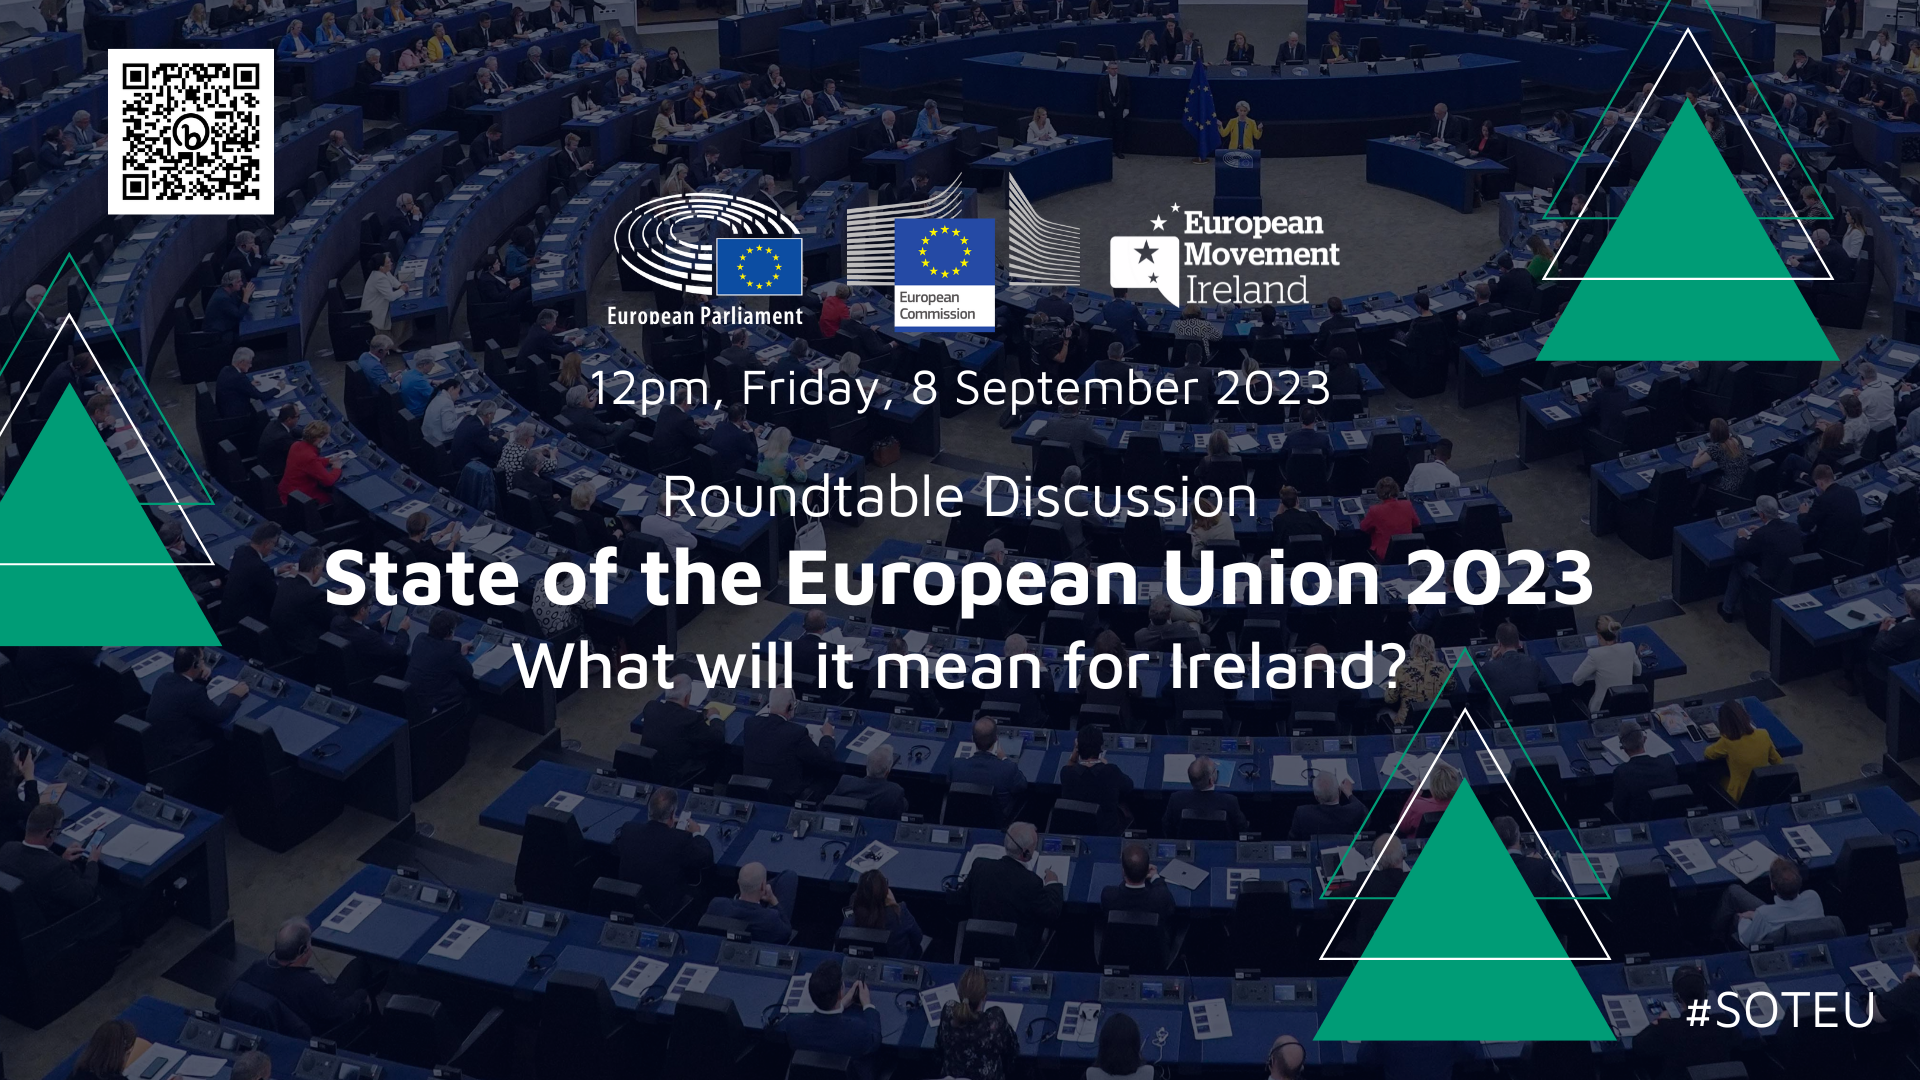 Promo image for SOTEU roundtable discussion on 8 September 2023